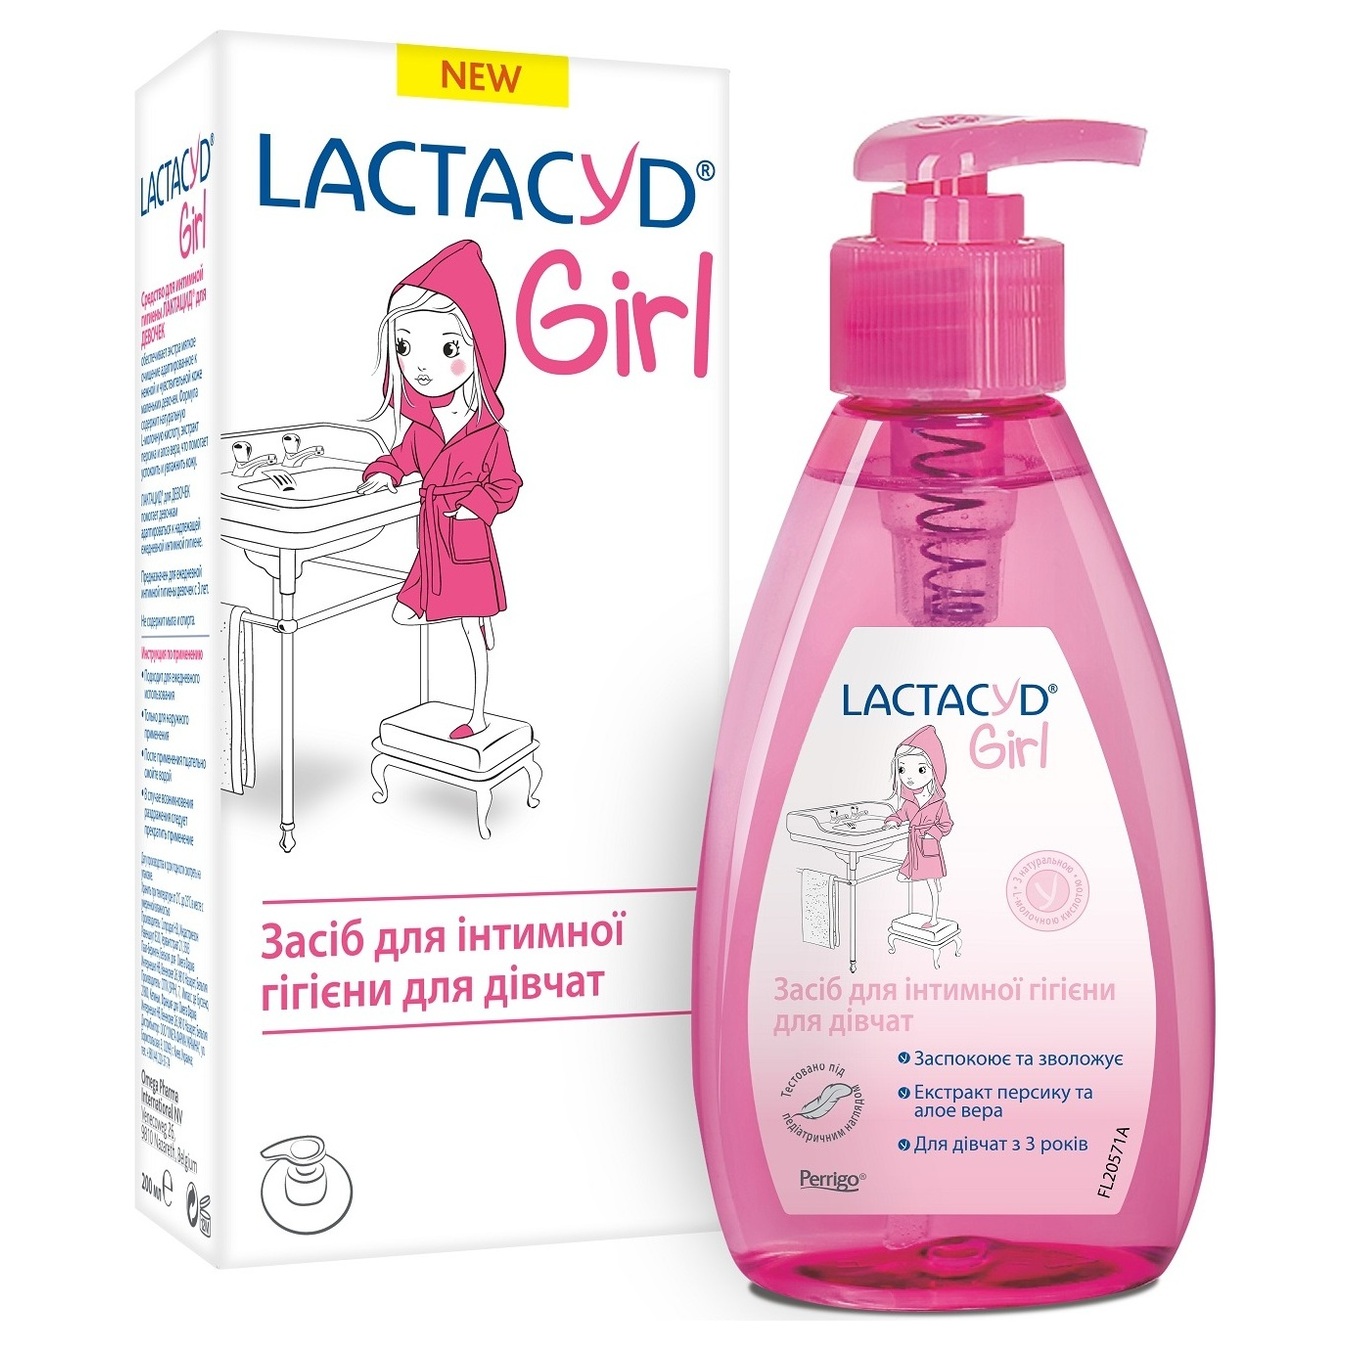 Lactacyd With Dispenser For Girls Intimate Hygiene Gel 200ml 4